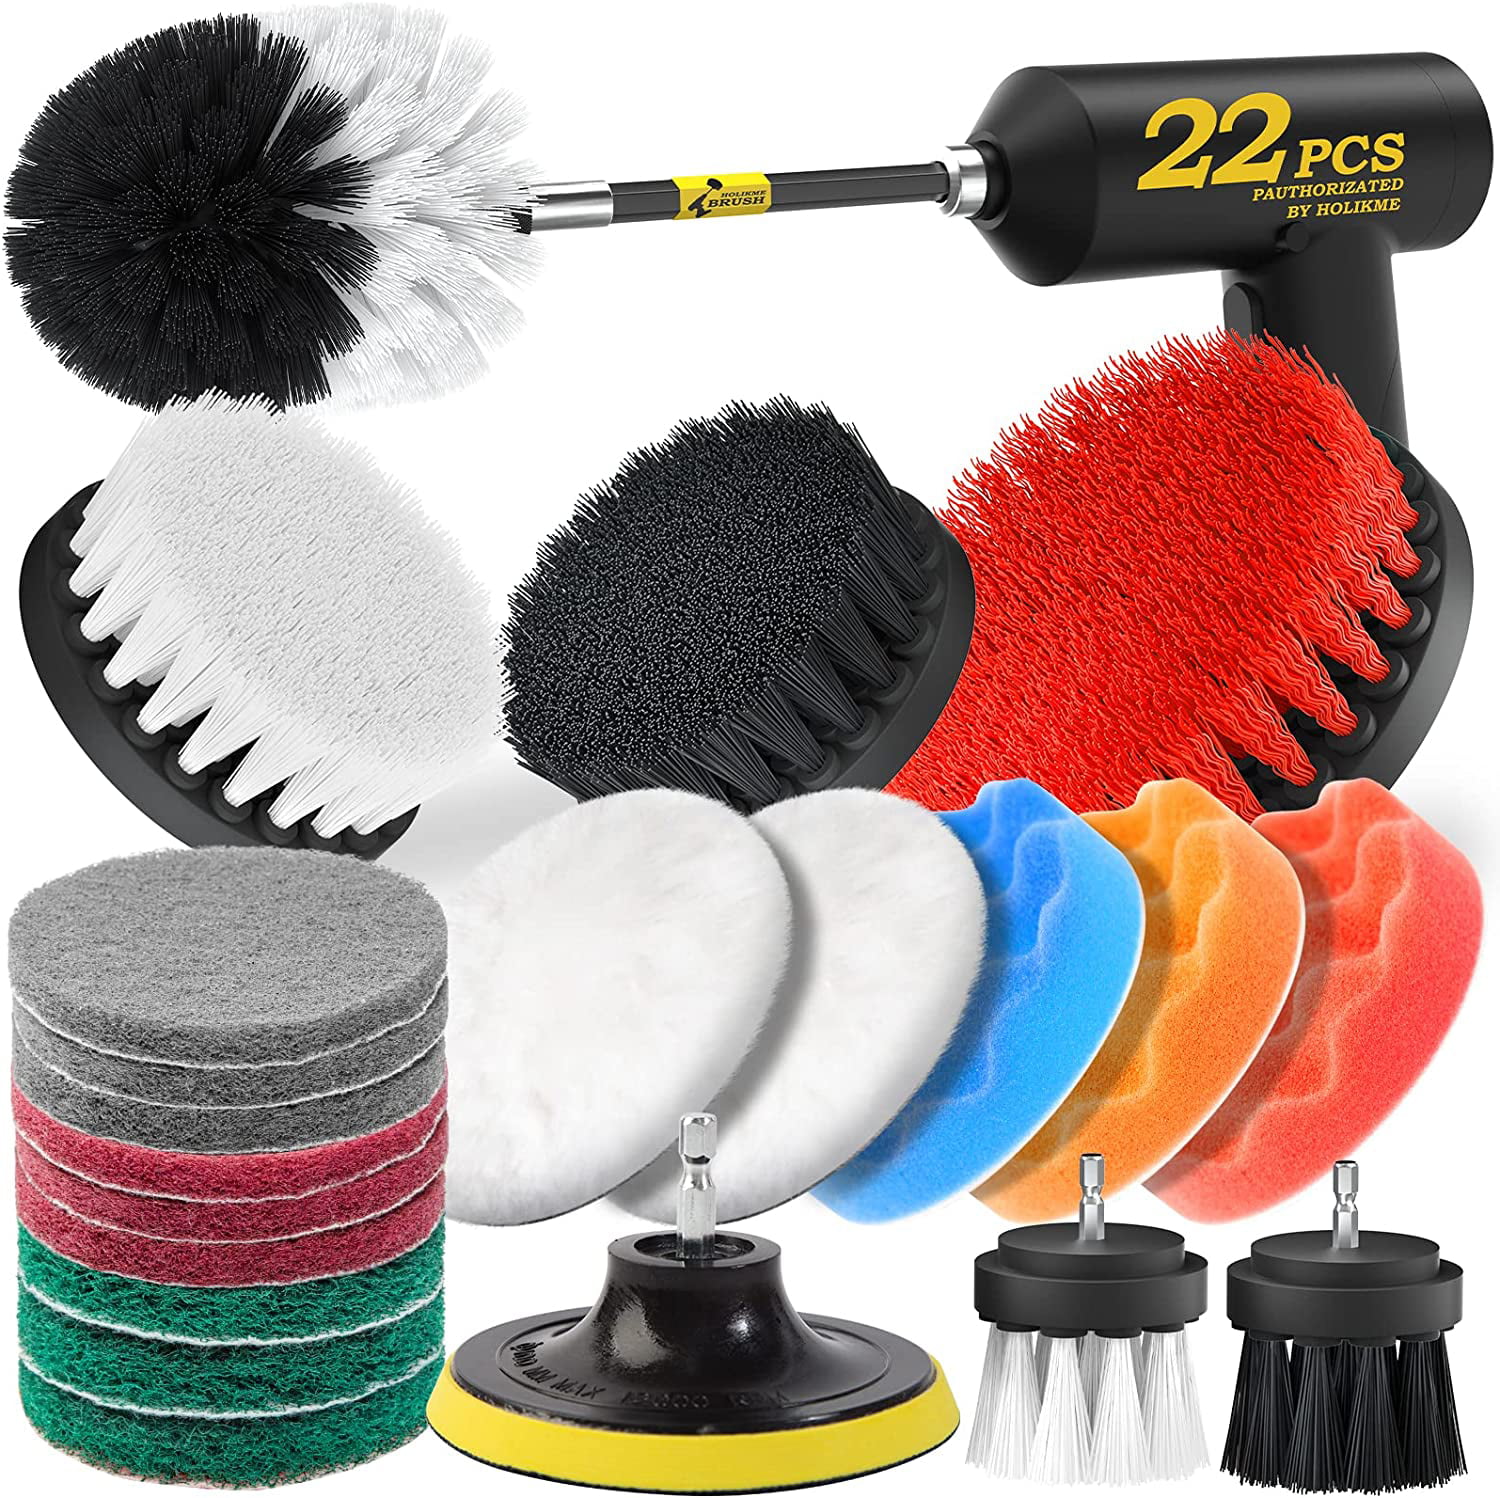 Power Scrubber Cleaning Brush Drill Attachment  Scrub Brush Attachment  Drill - 7pcs - Aliexpress